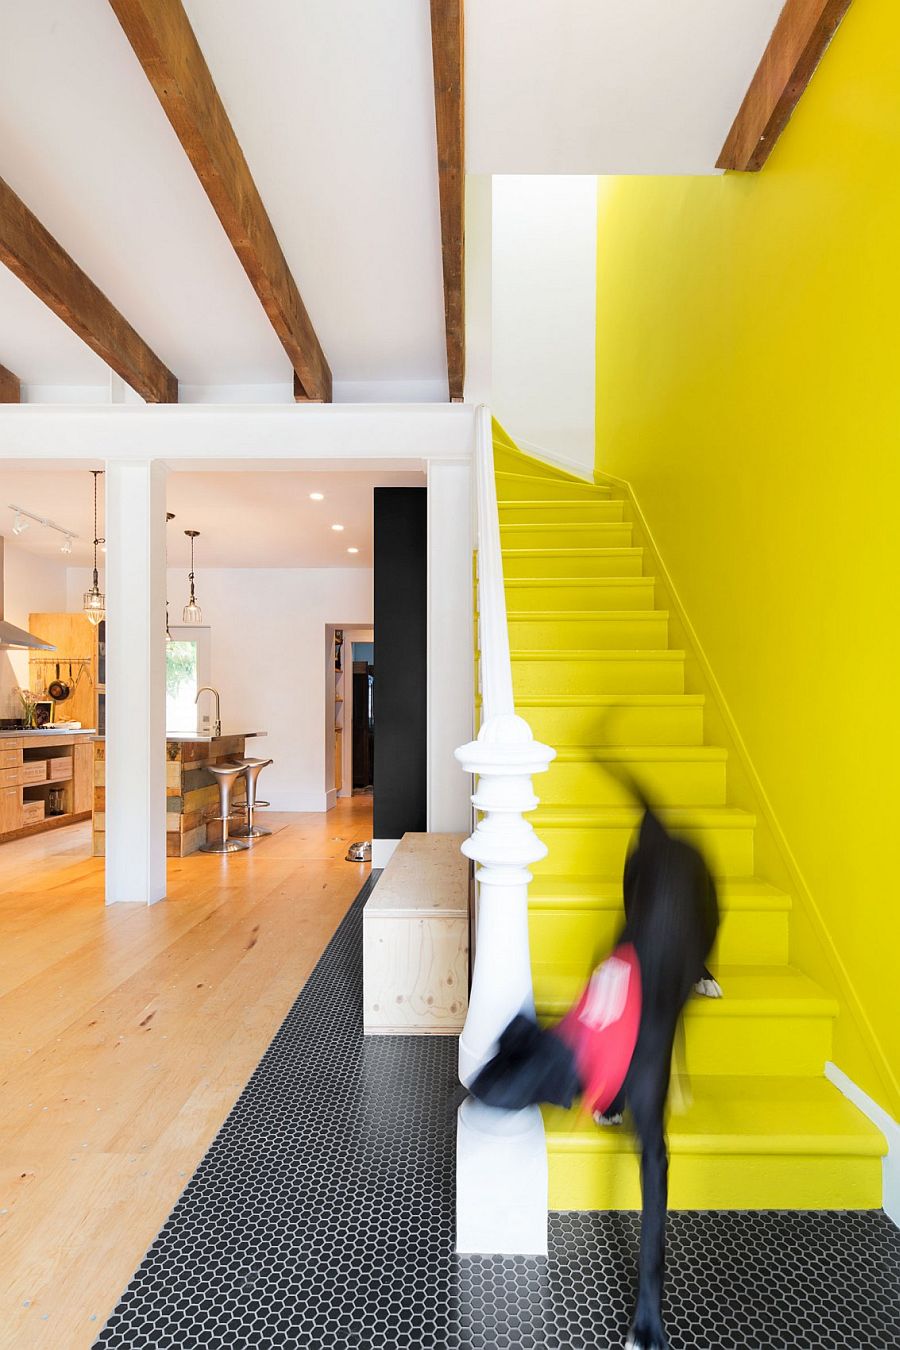 Staircase in yellow and penny tiled flooring delineate space inside the vivacious, remodeled row house